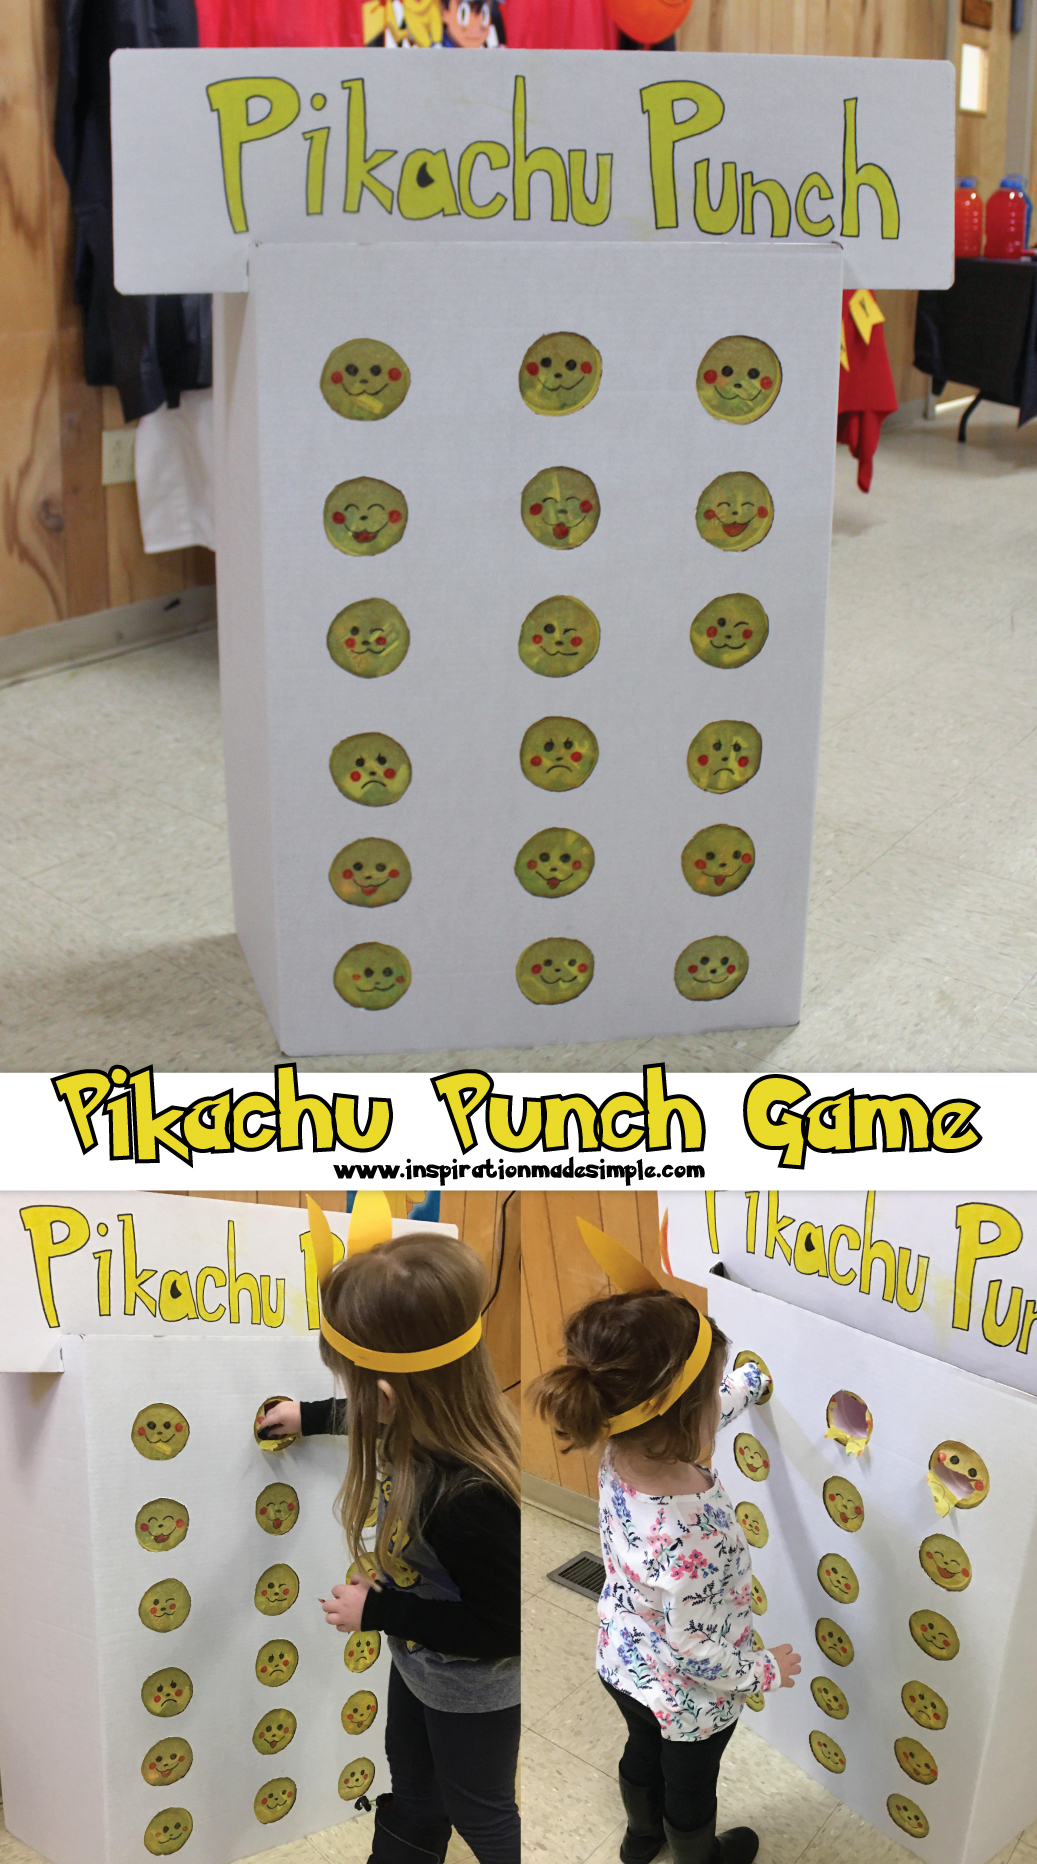 DIY Pokemon Party with lots of fun ideas!